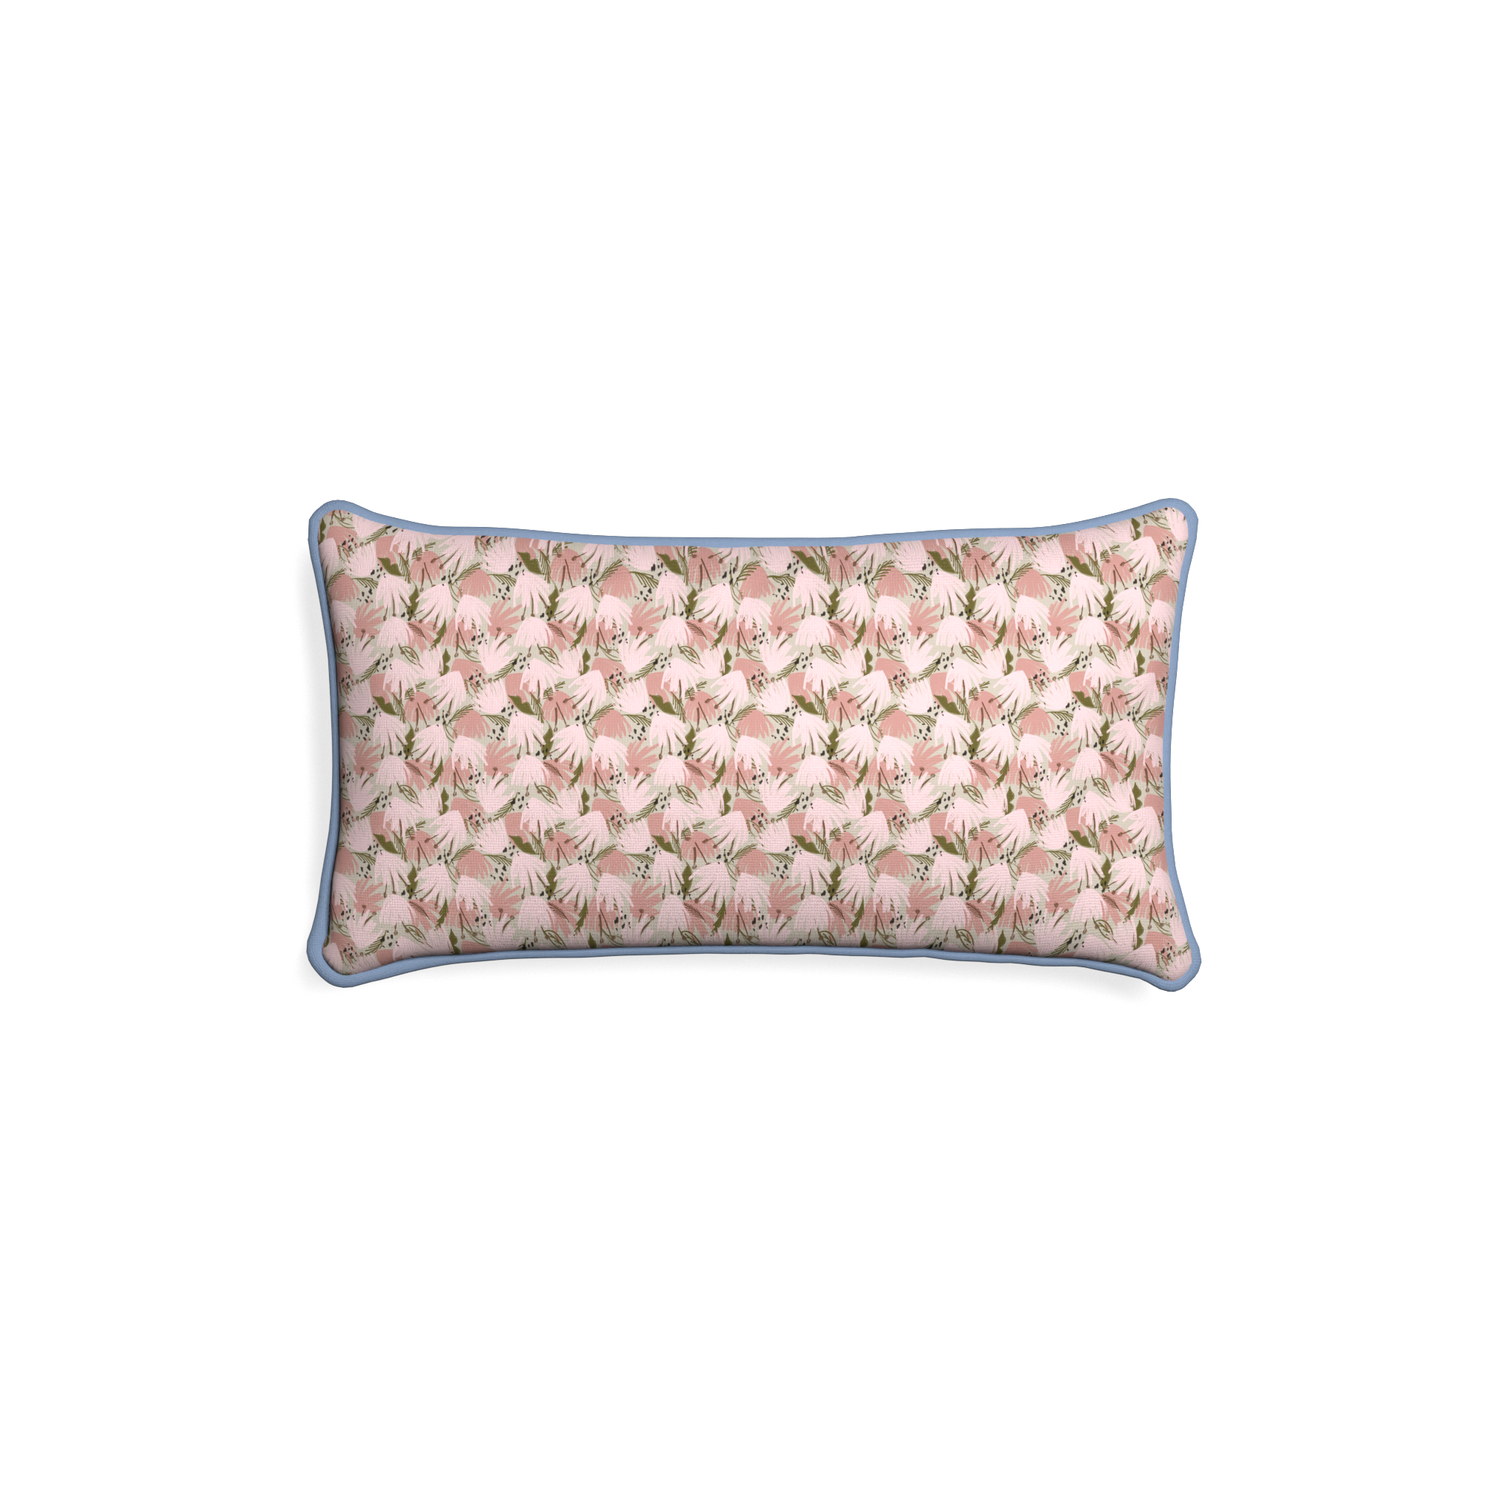 Petite-lumbar eden pink custom pink floralpillow with sky piping on white background